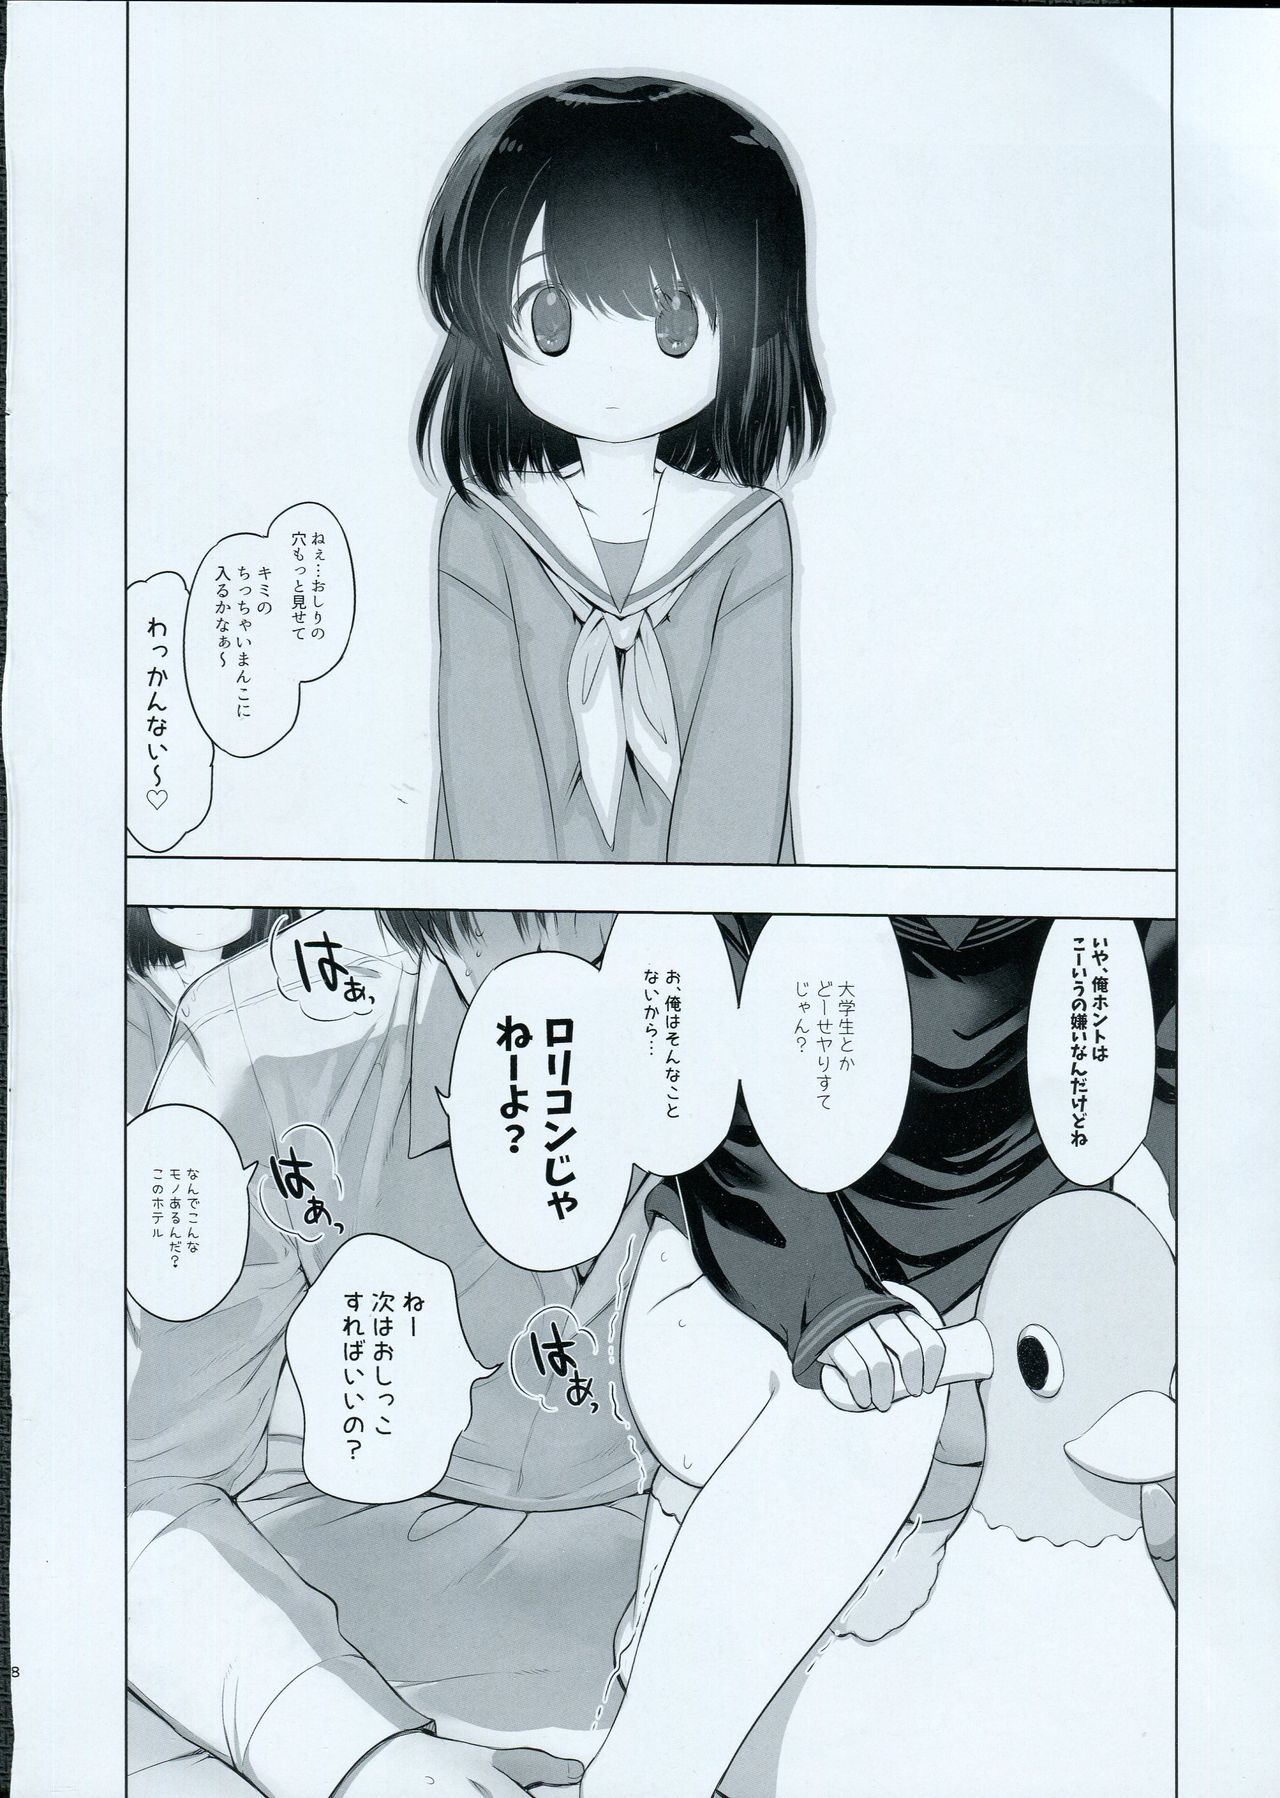 (C91) [EAR-POP (Misagi Nagomu)] Used to Be a Child page 7 full